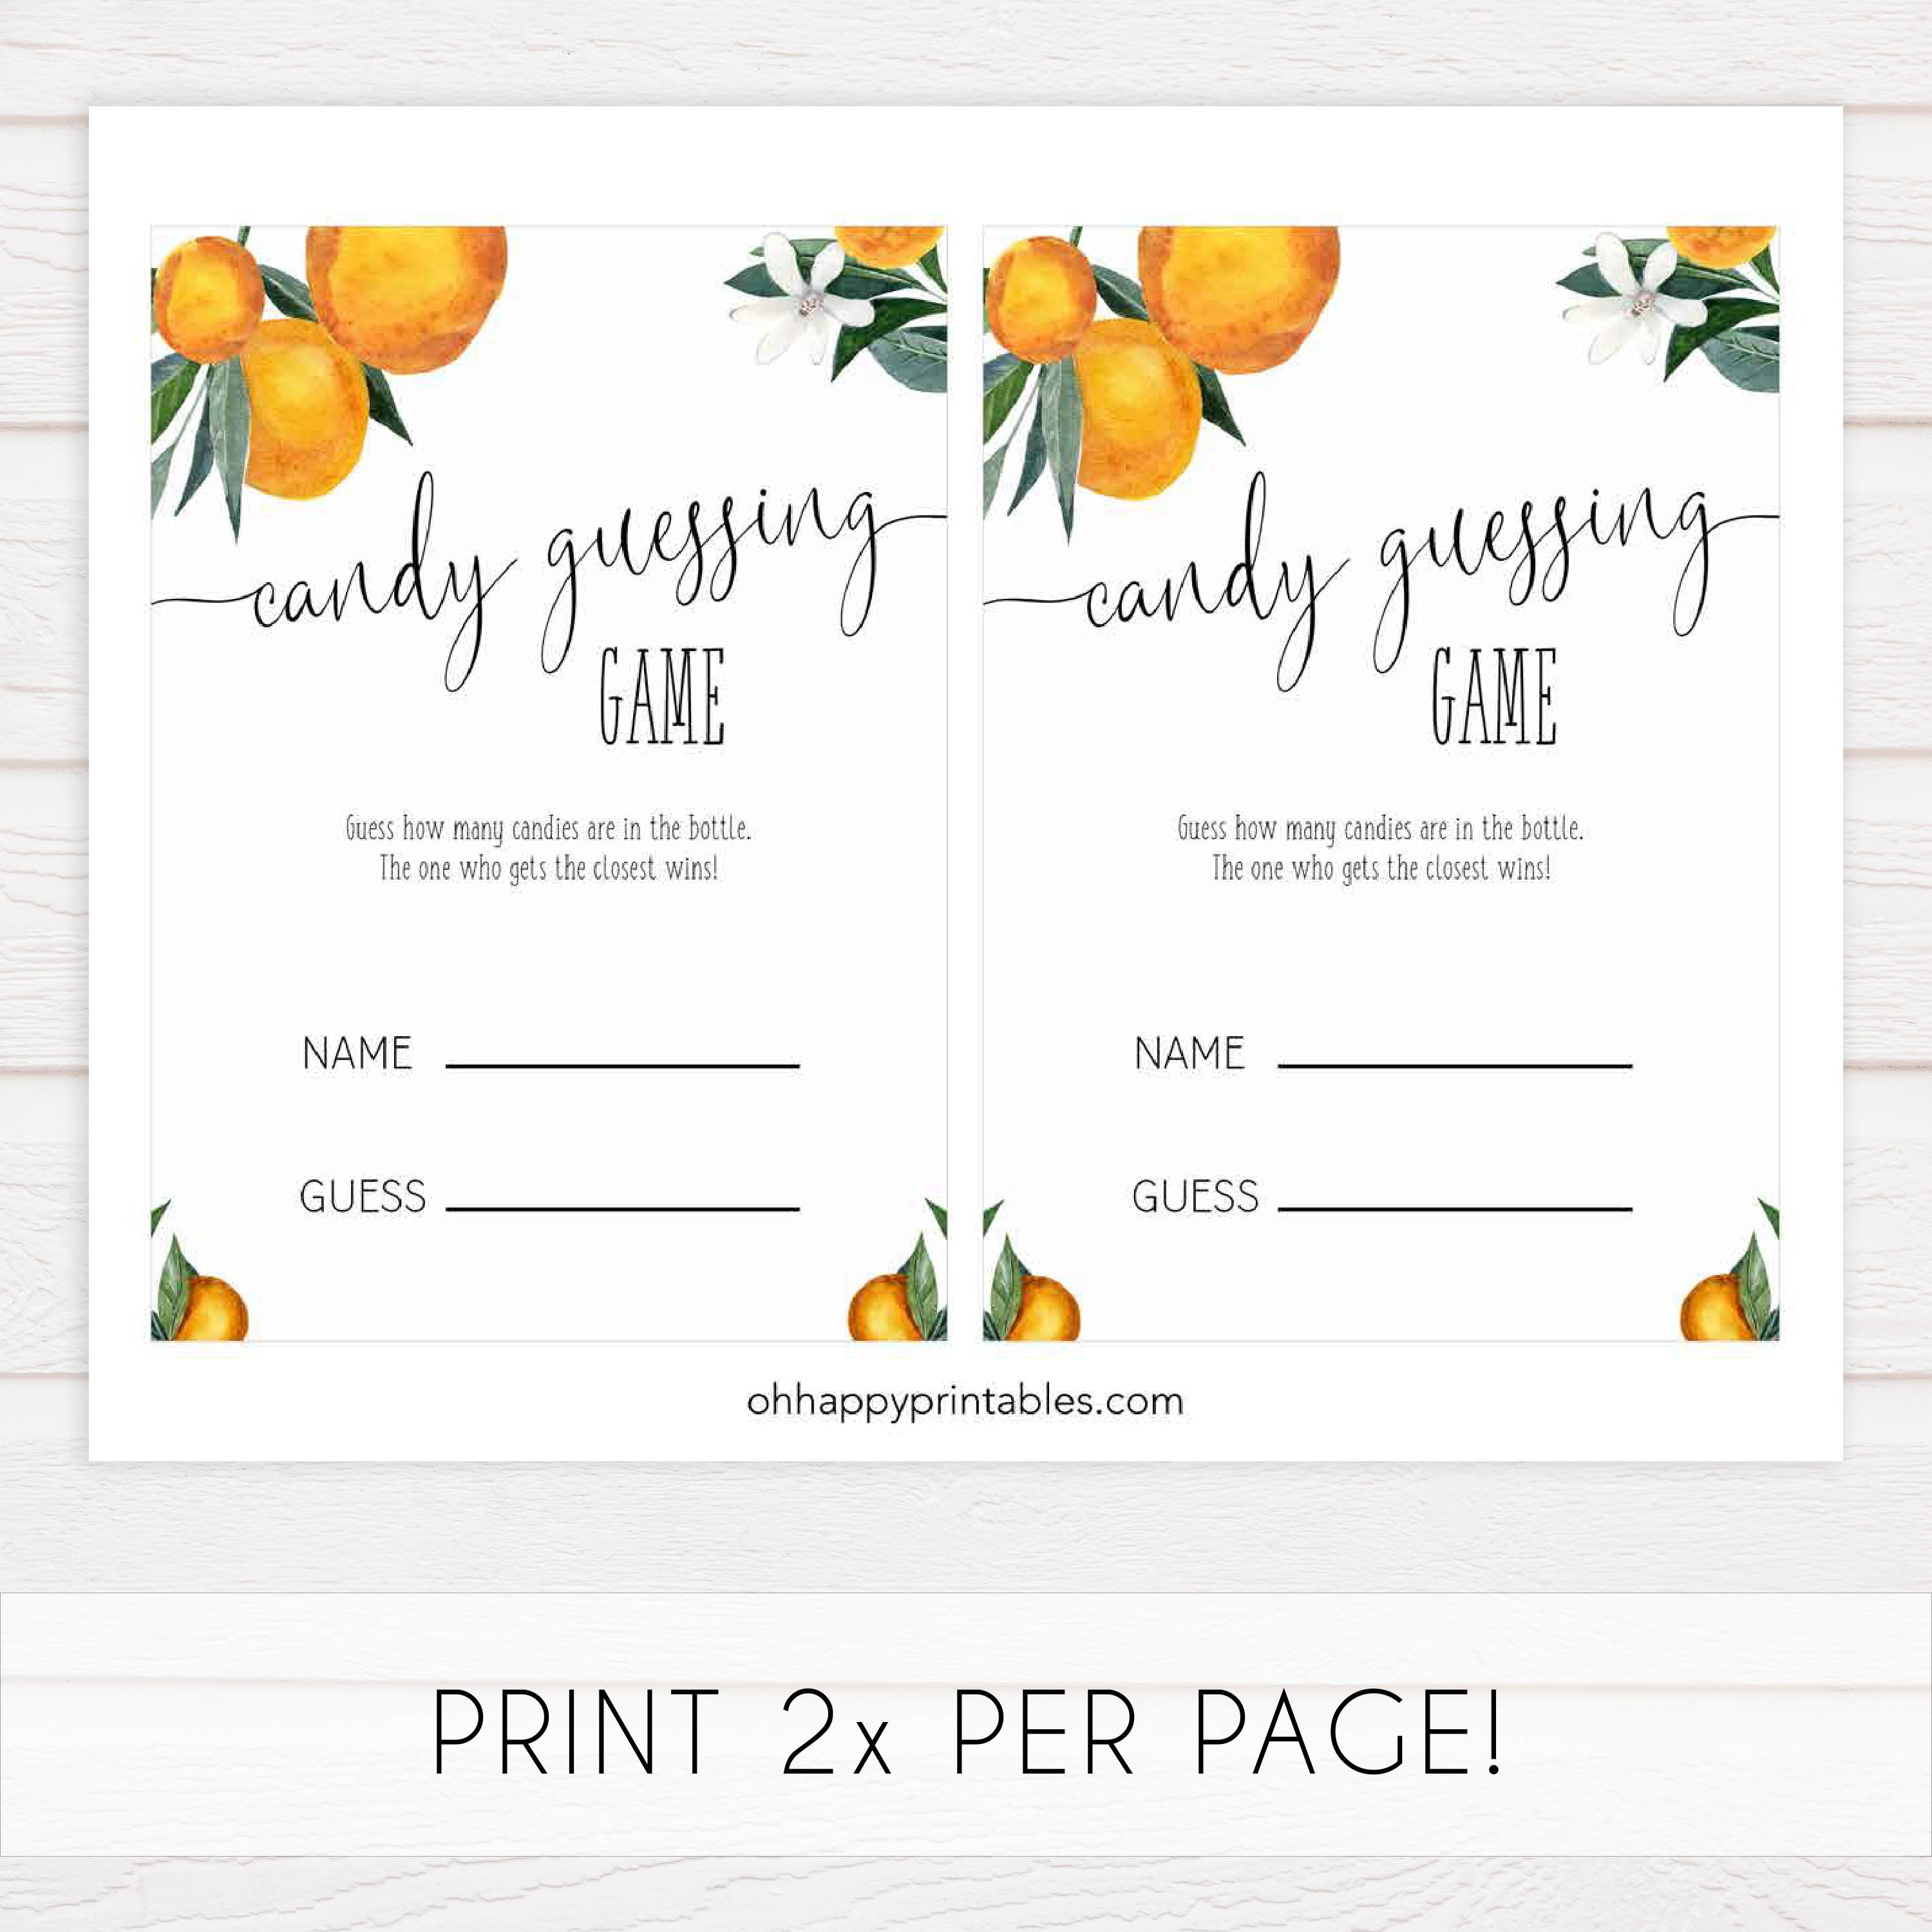 candy guessing game, Printable baby shower games, little cutie baby games, baby shower games, fun baby shower ideas, top baby shower ideas, little cutie baby shower, baby shower games, fun little cutie baby shower ideas, citrus baby shower games, citrus baby shower, orange baby shower